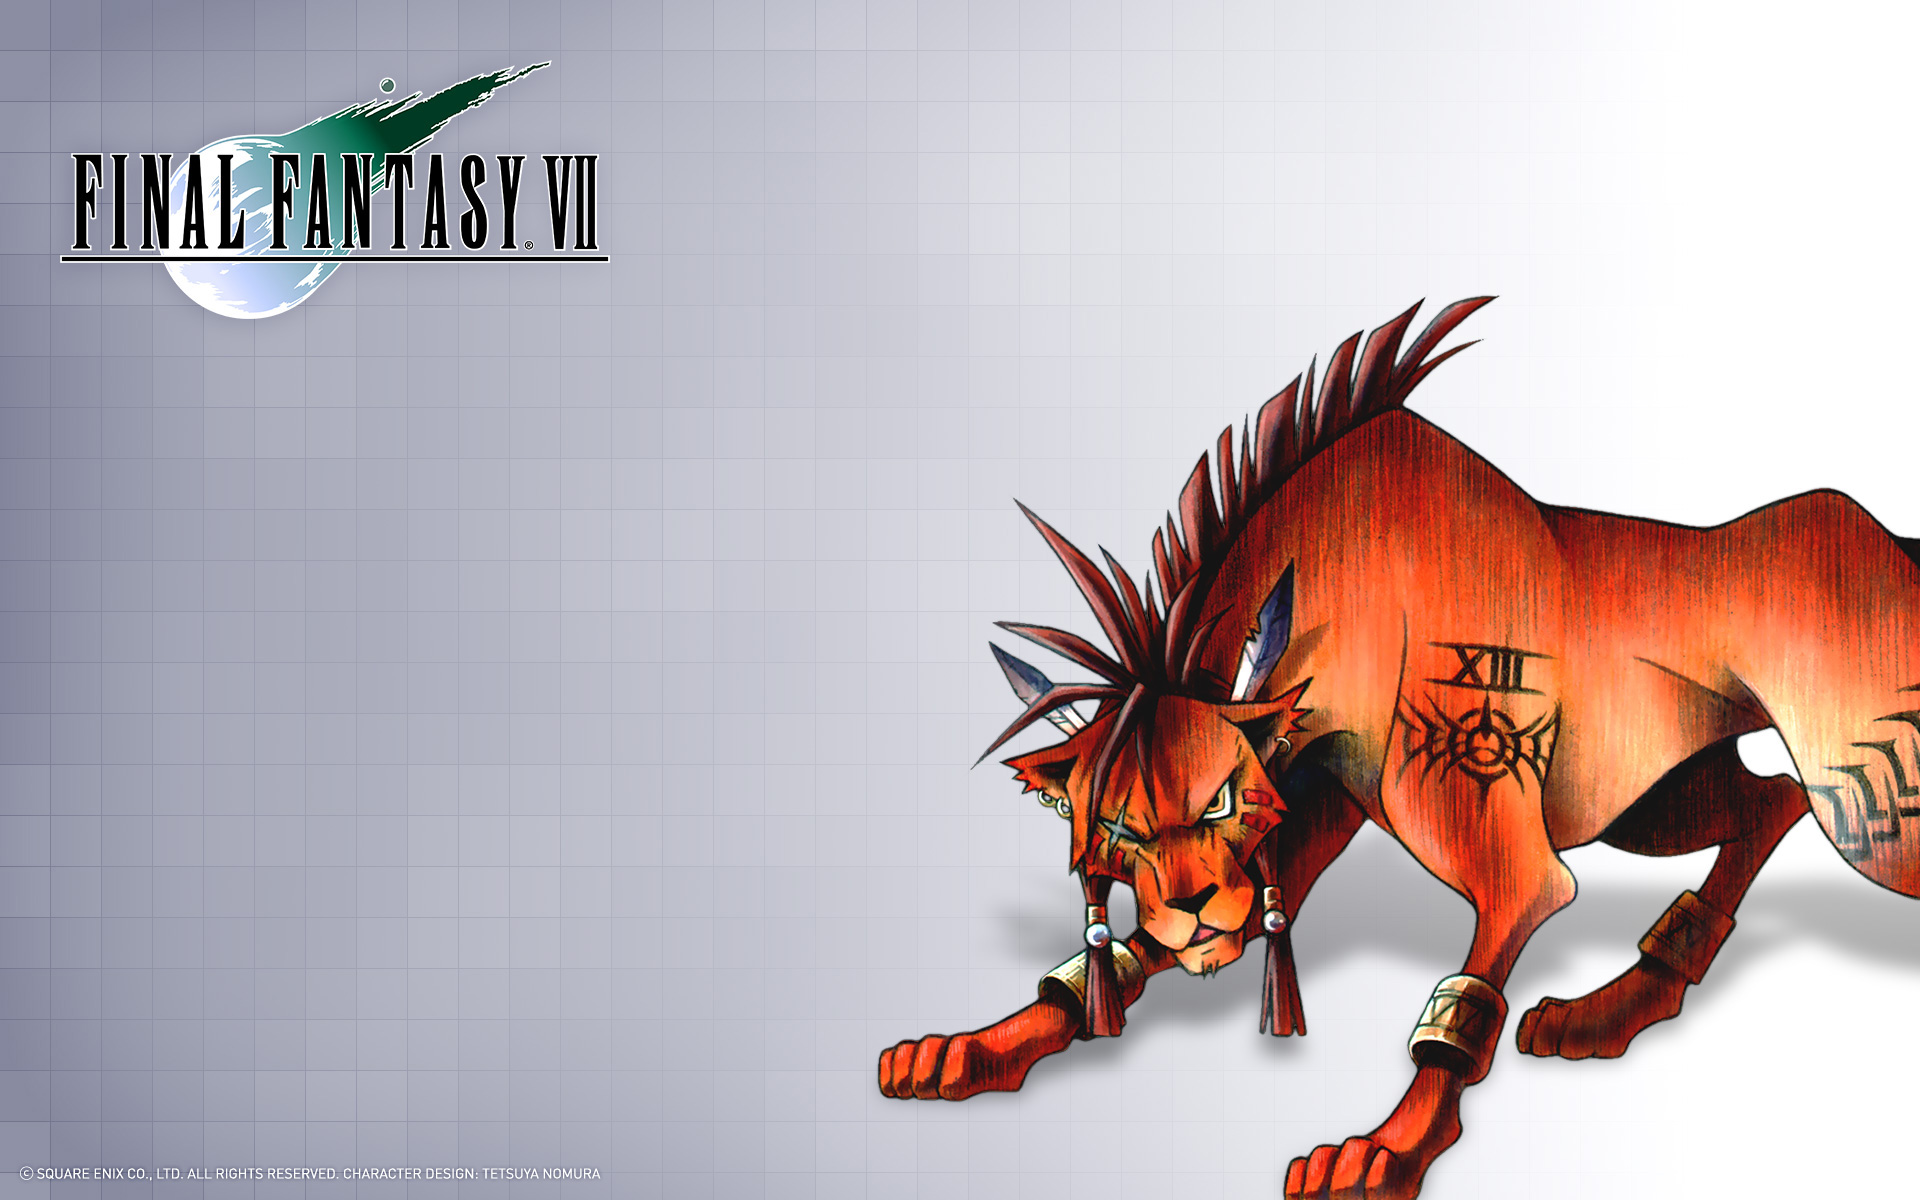 red xiii, final fantasy, video game, final fantasy vii